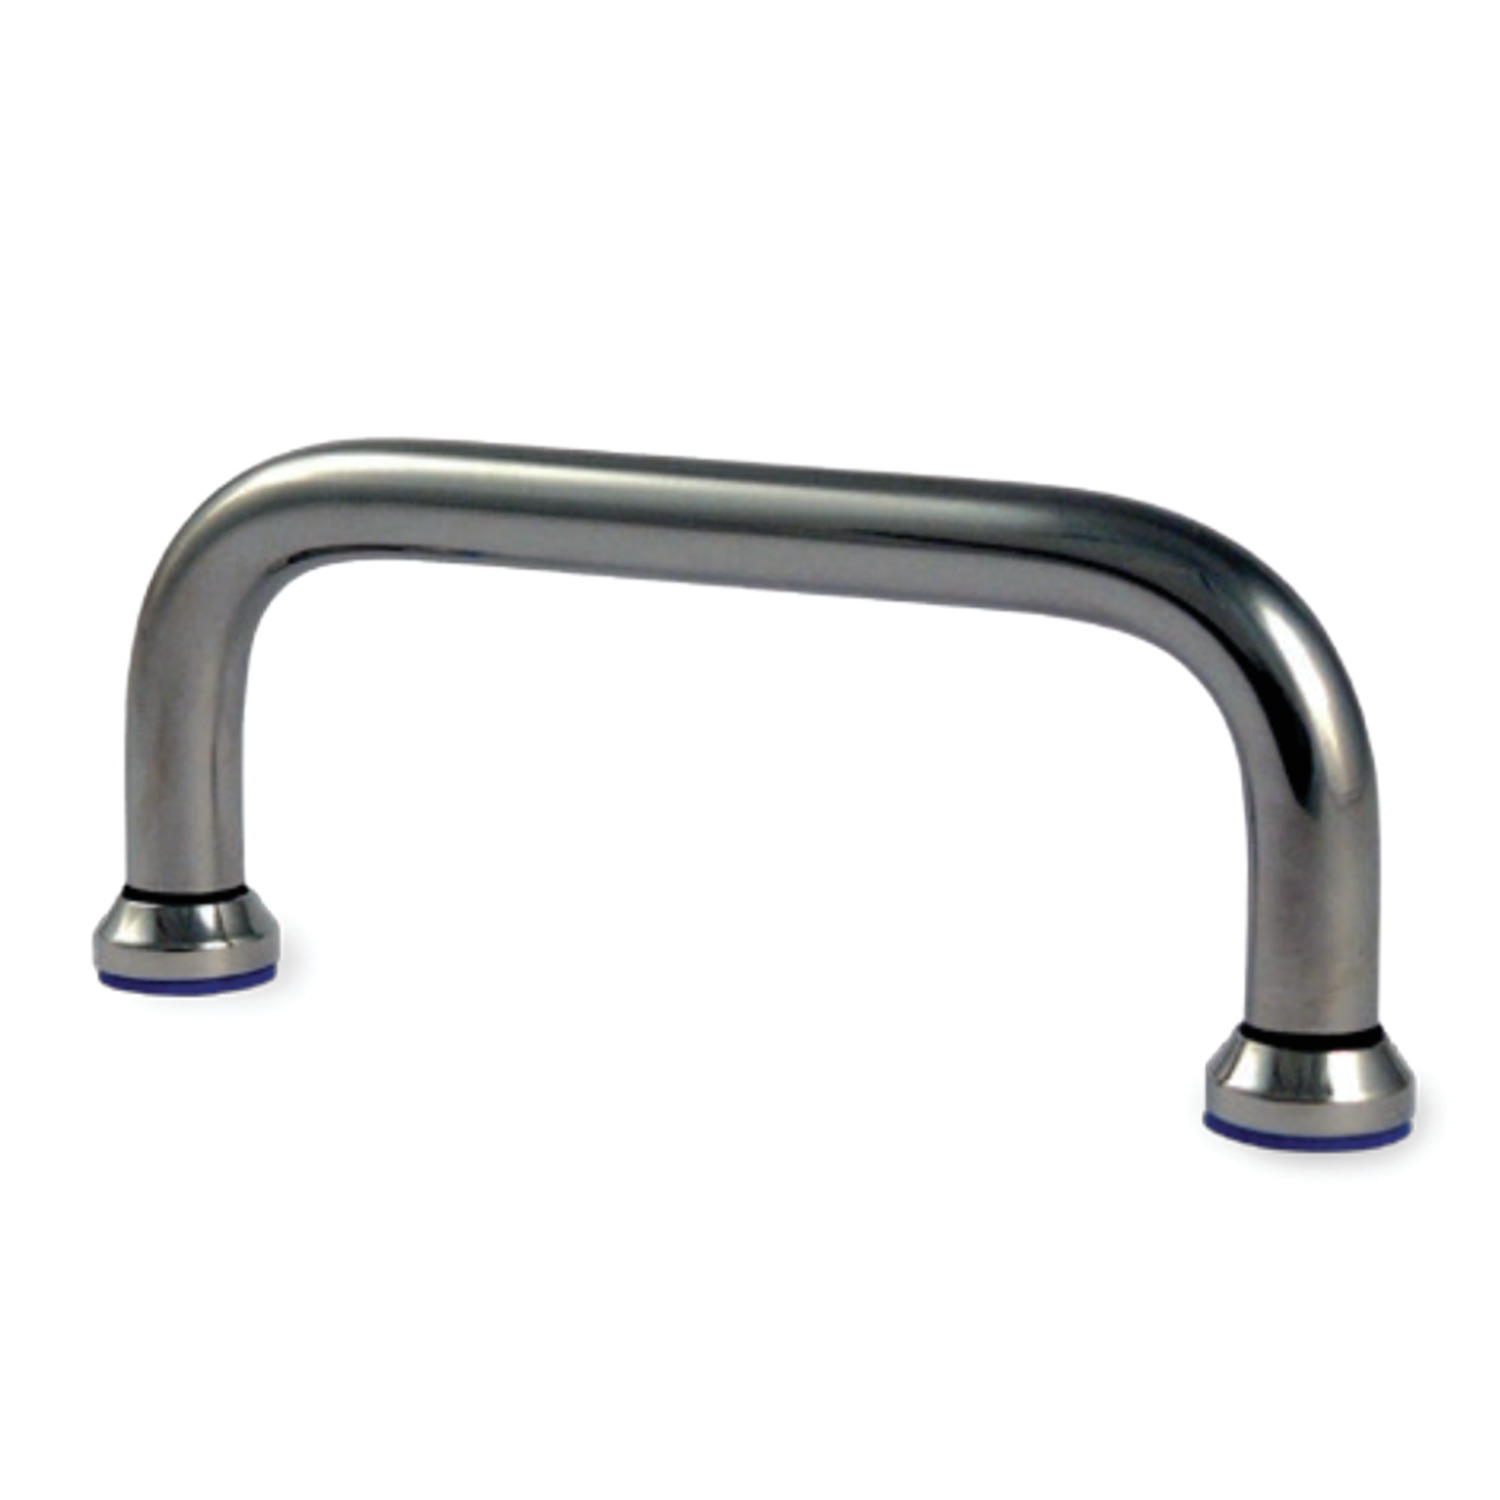 Product 79760, Pull Handles - 3A Standard hygienic line, stainless steel / 